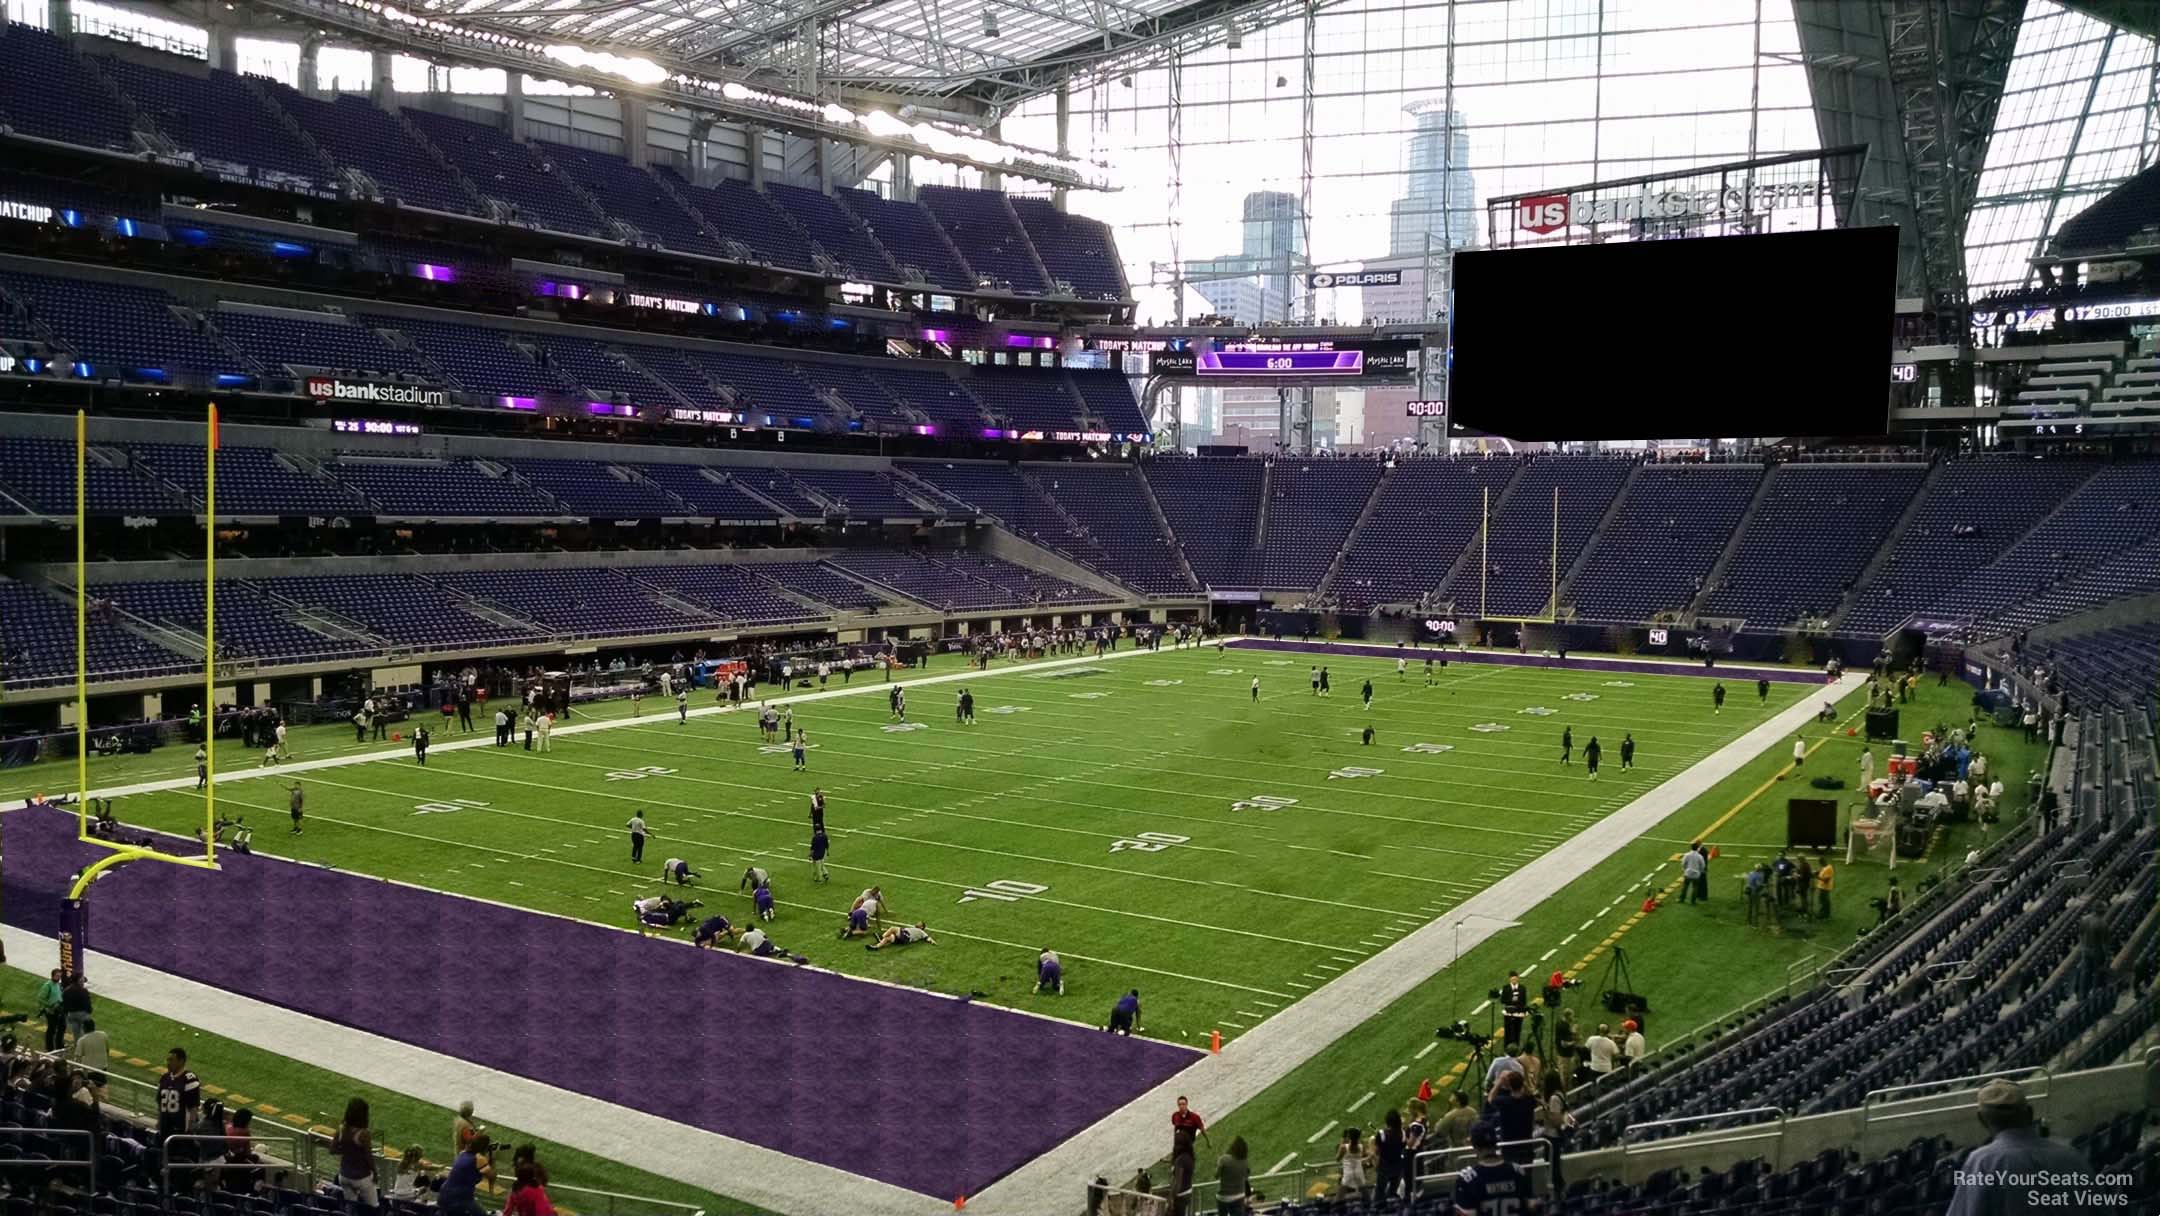 section 116, row 24 seat view  for football - u.s. bank stadium